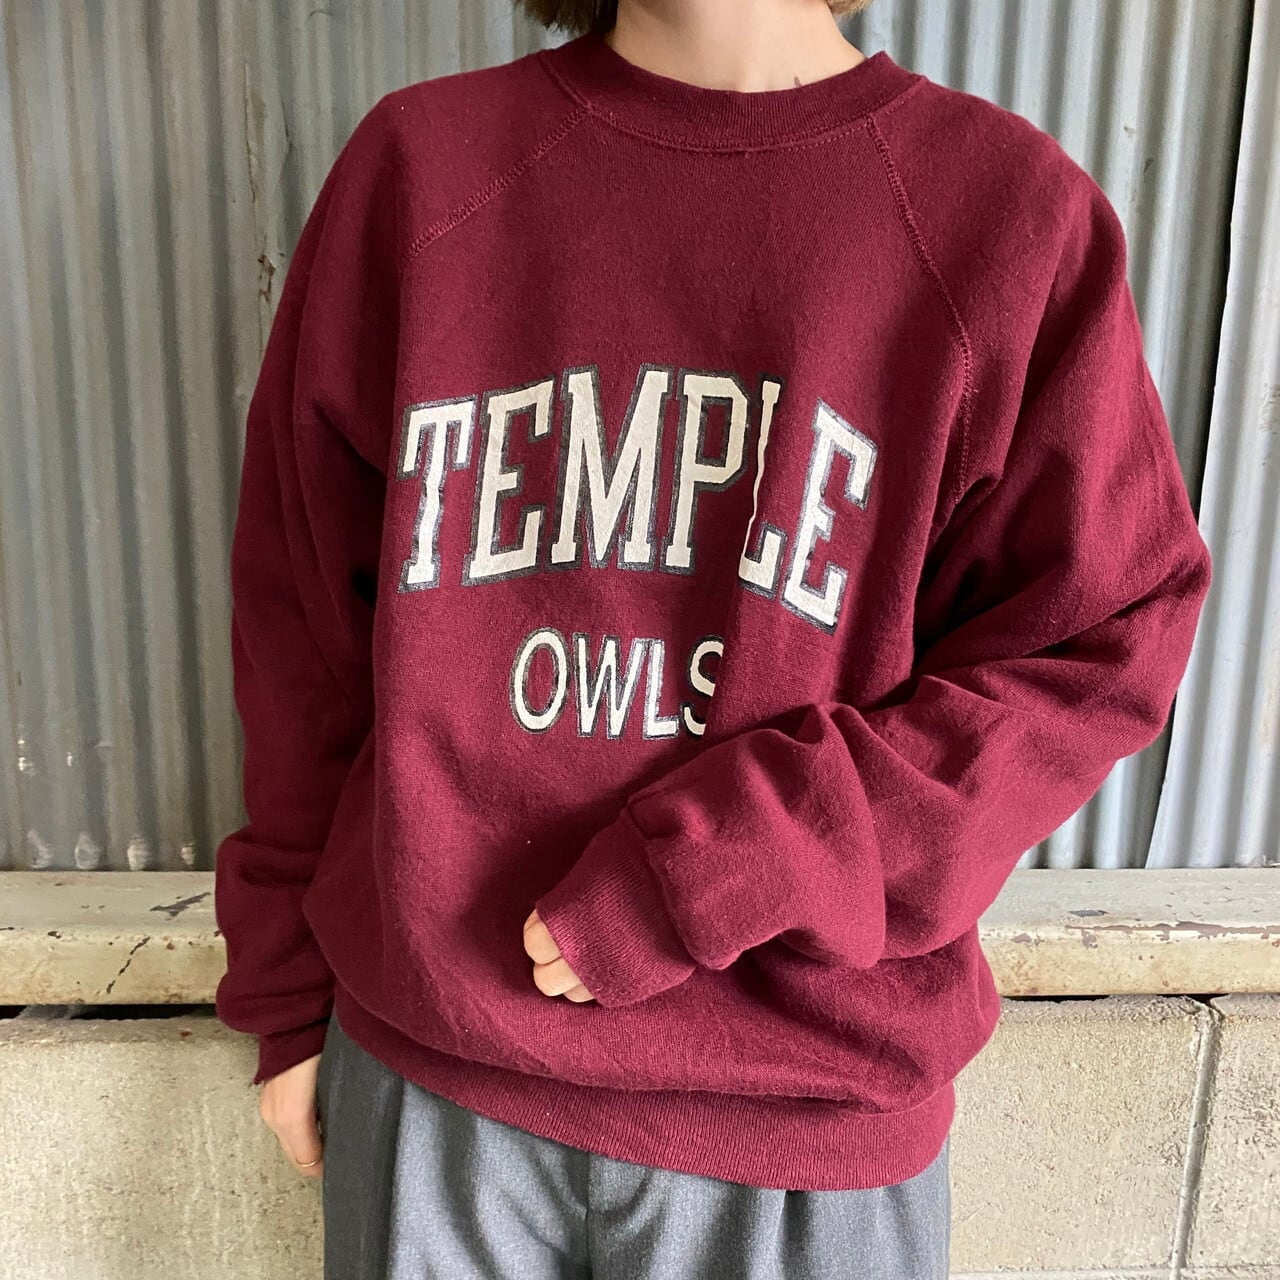 60's vintage ヴィンテージ カレッジ スウェット TEMPLE